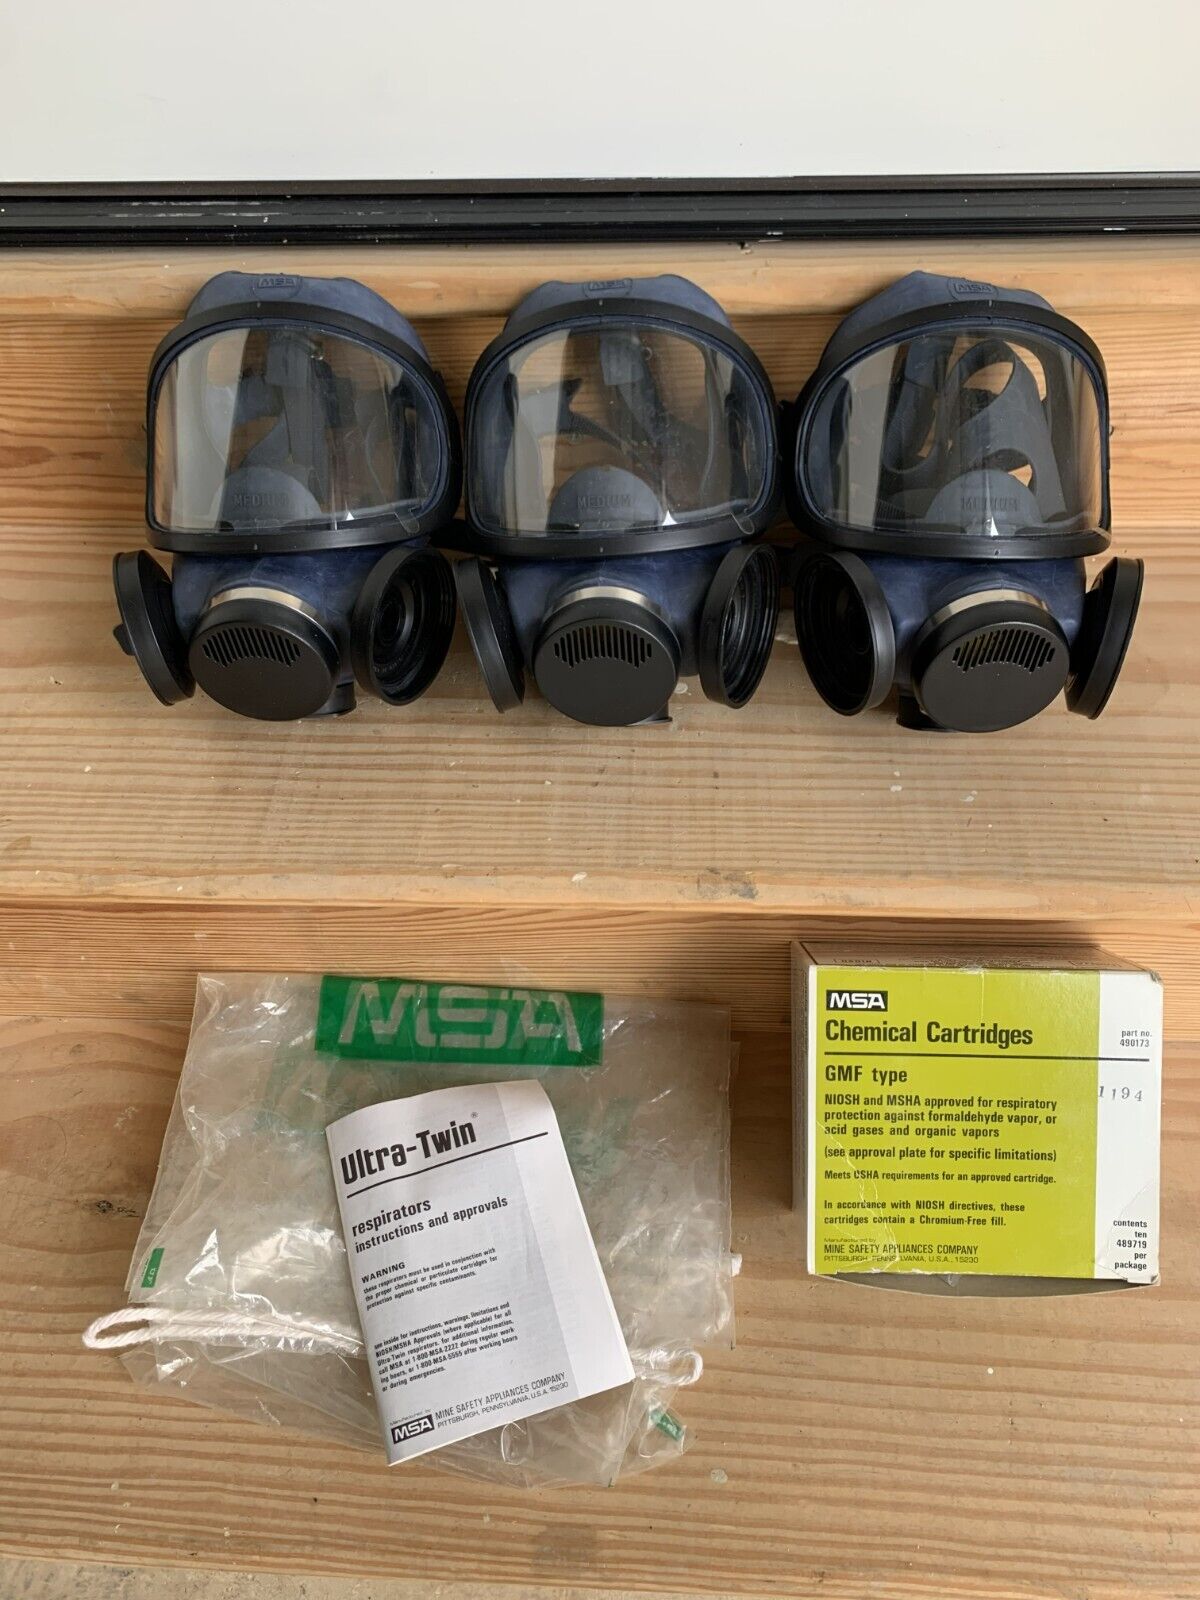 LOT OF 3 1990s Vintage Medium MSA Ultra Twin Gas Masks and Filters